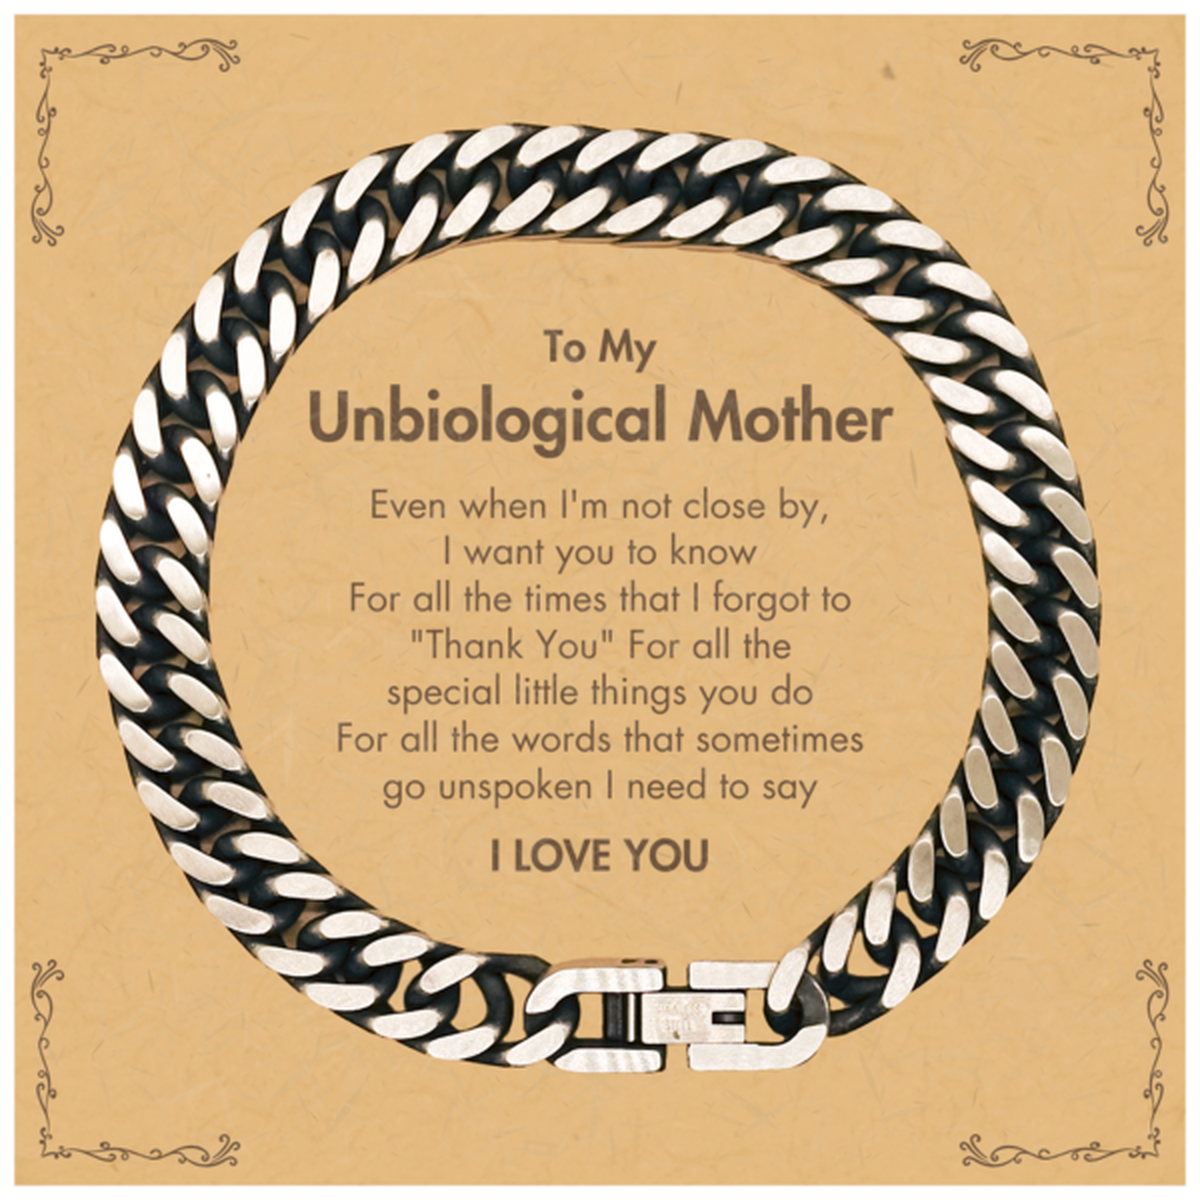 Thank You Gifts for Unbiological Mother, Keepsake Cuban Link Chain Bracelet Gifts for Unbiological Mother Birthday Mother's day Father's Day Unbiological Mother For all the words That sometimes go unspoken I need to say I LOVE YOU